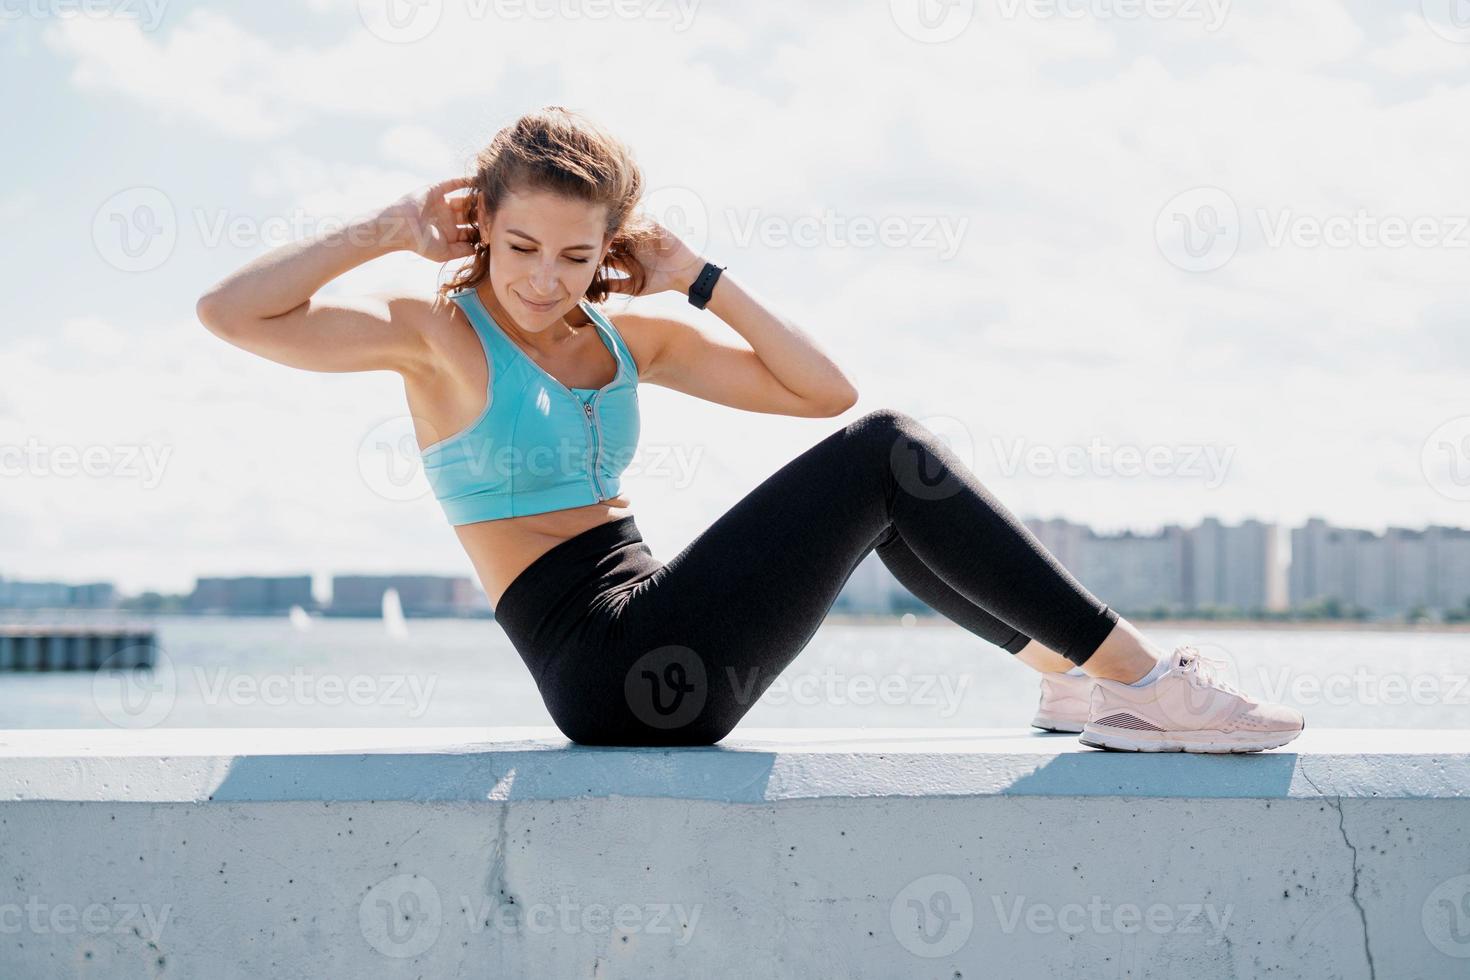 Doing exercises sports fitness young woman photo